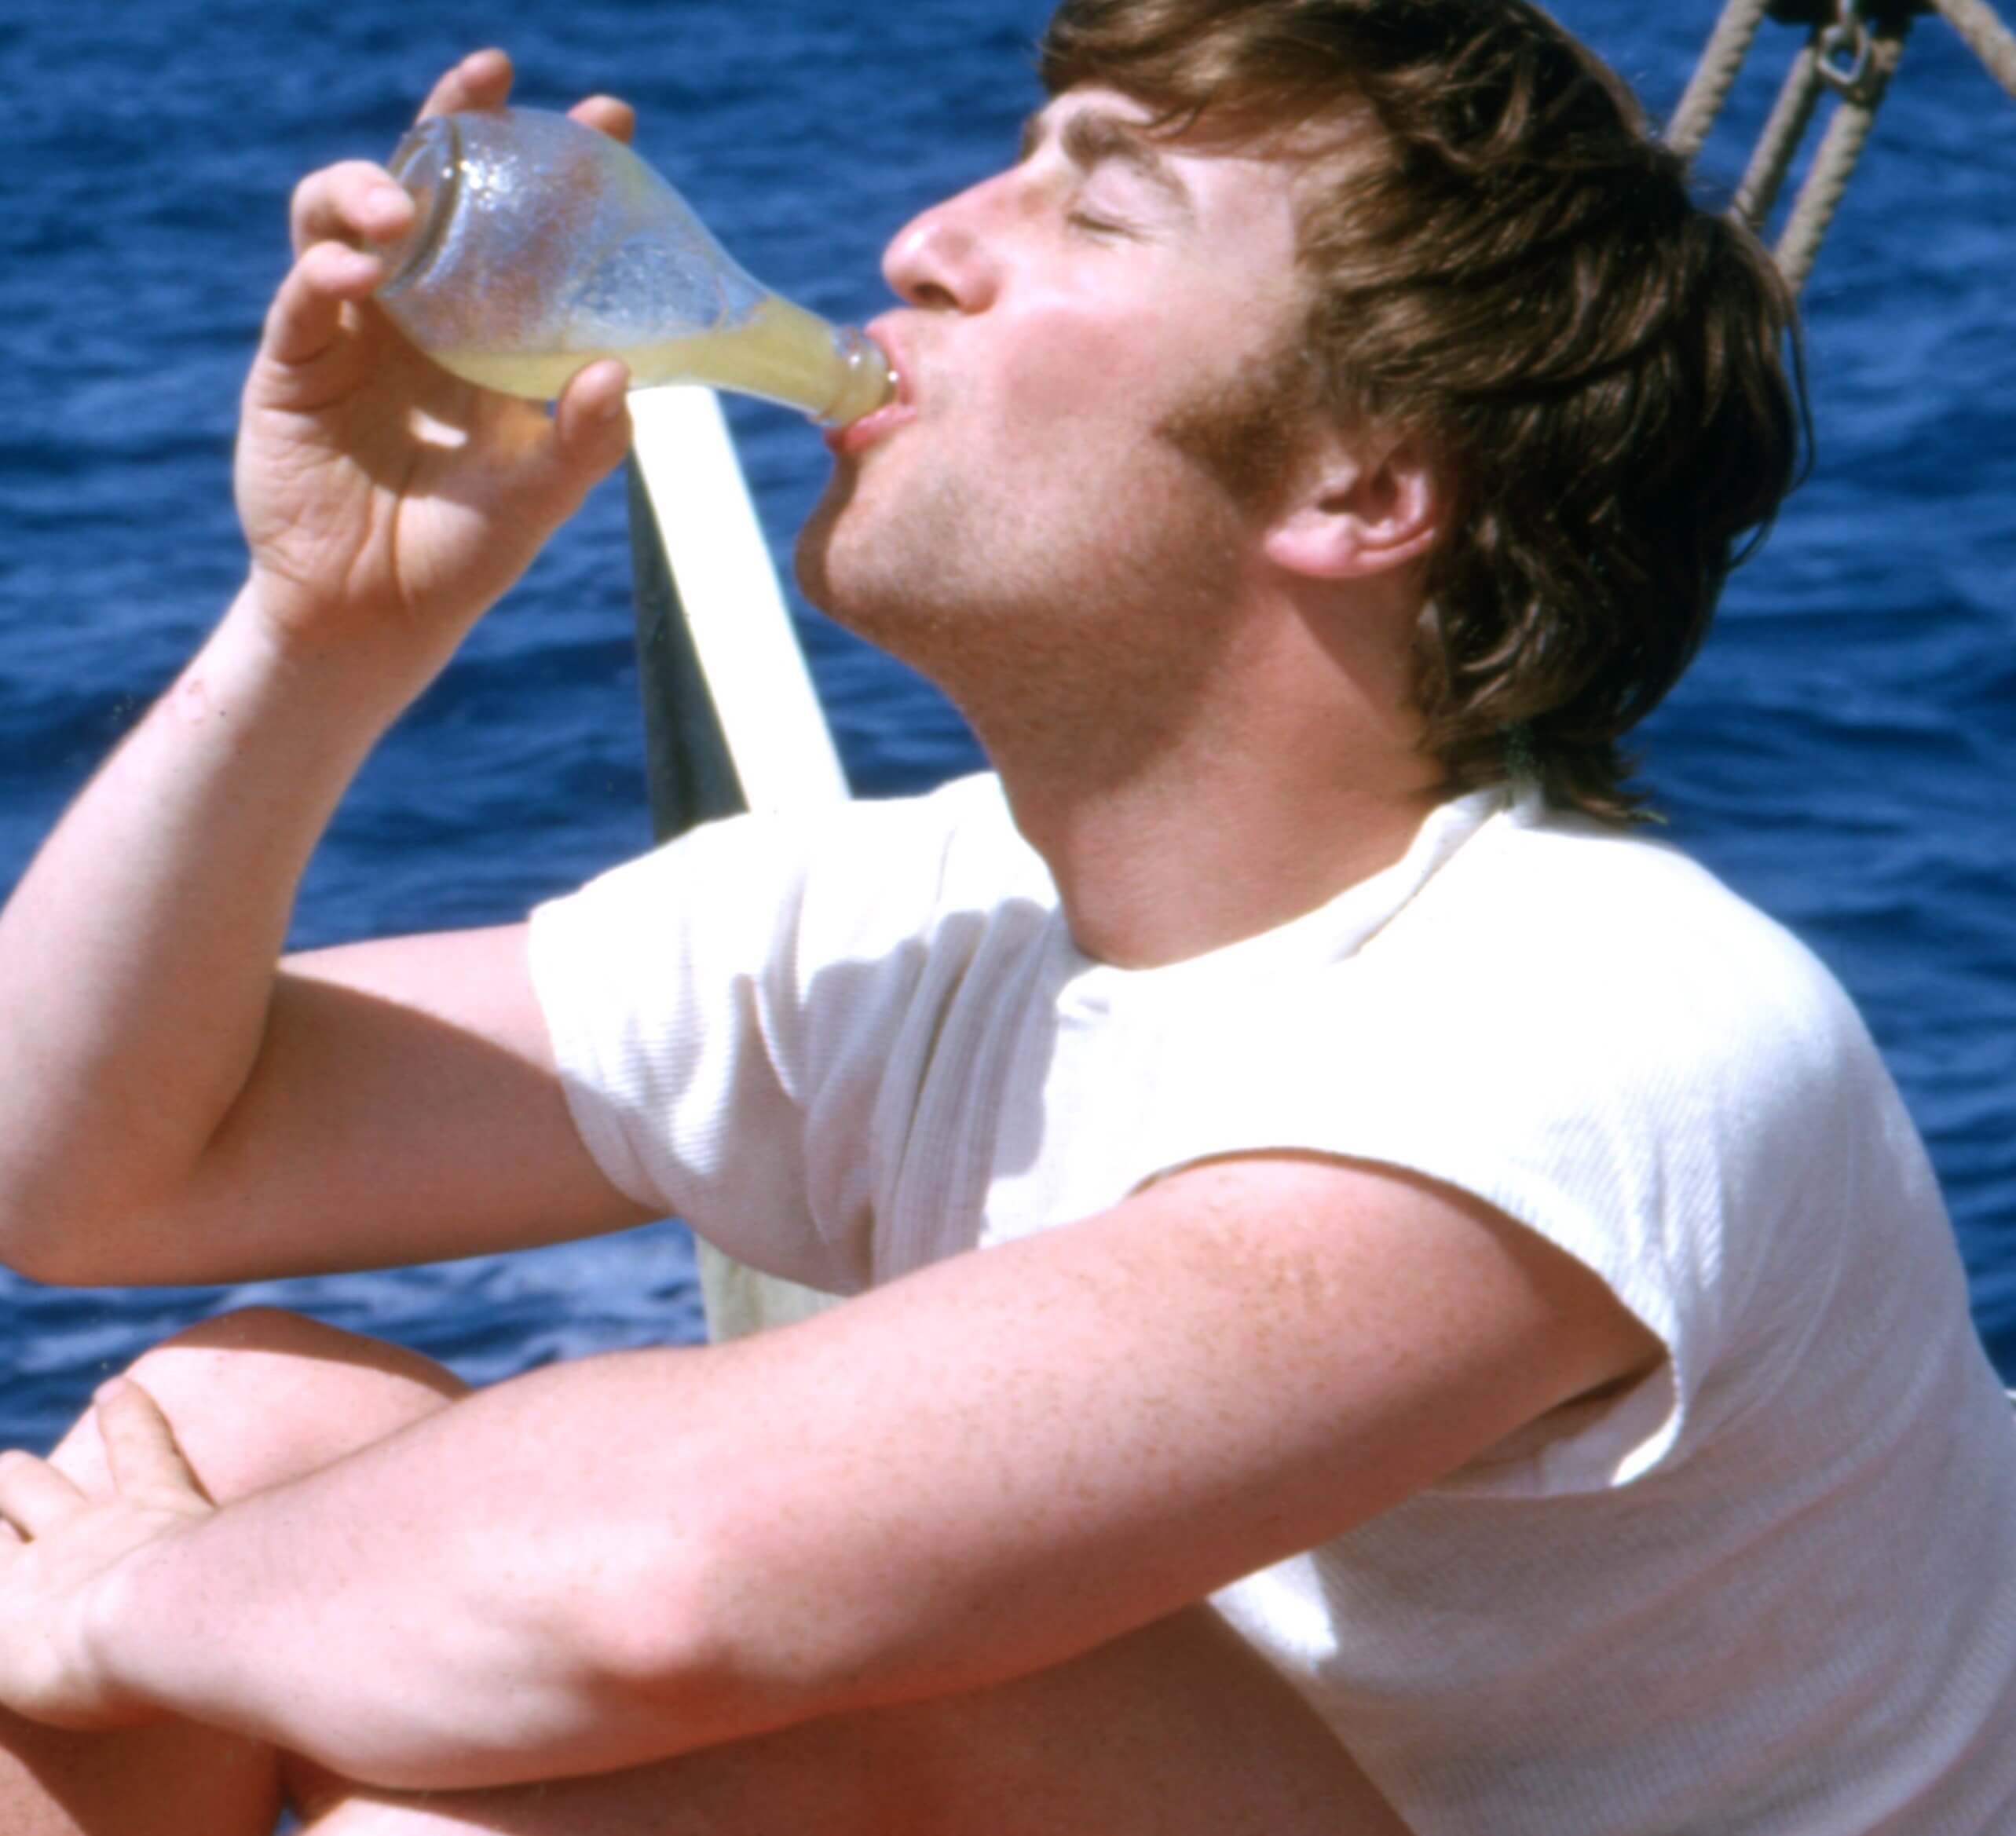 John Lennon with a drink in his hand